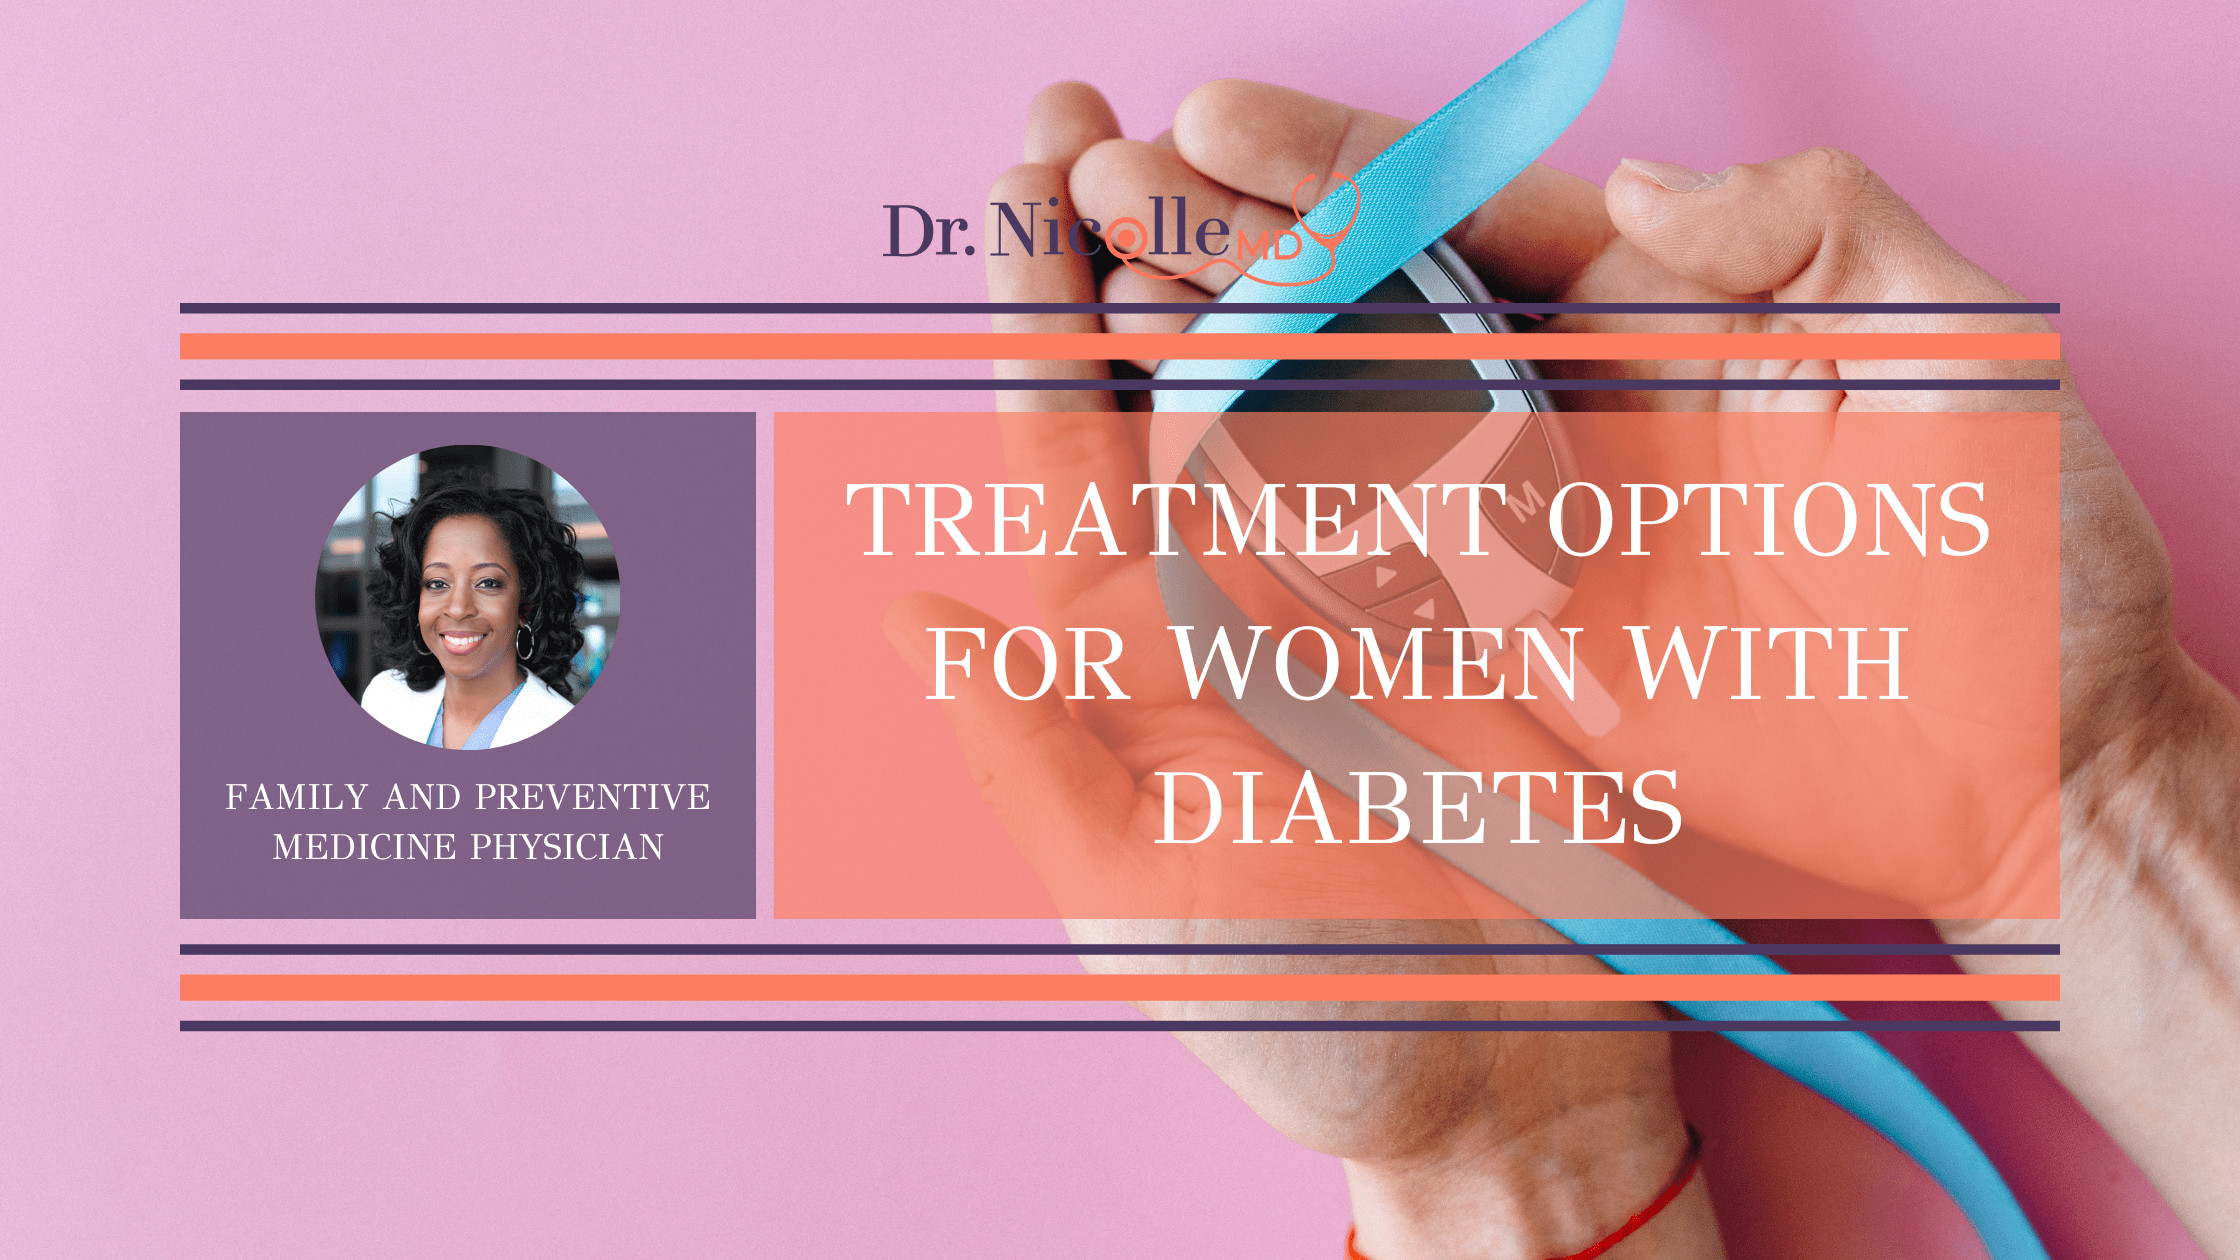 11Image of Treatment for Women with Diabetes.